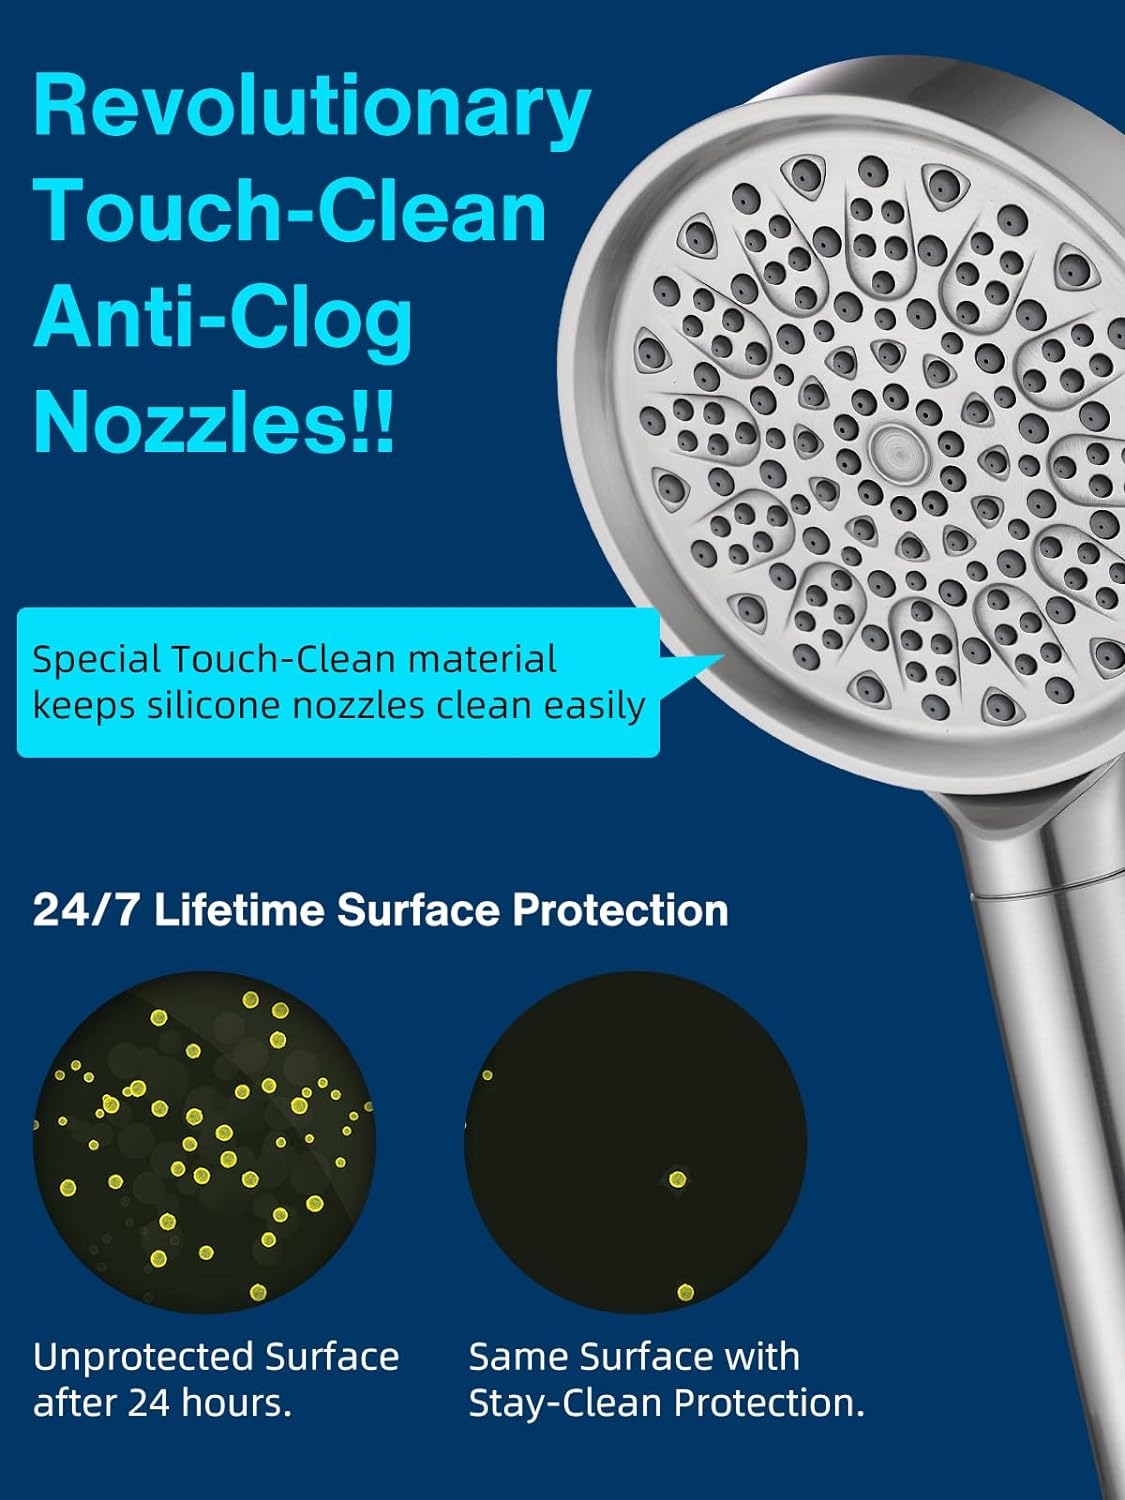 Cobbe Filtered Shower Head with Handheld, 6 Spray Modes, Water Softener Filters - Remove Chlorine, Reduce Dry Skin - Brushed Nickel